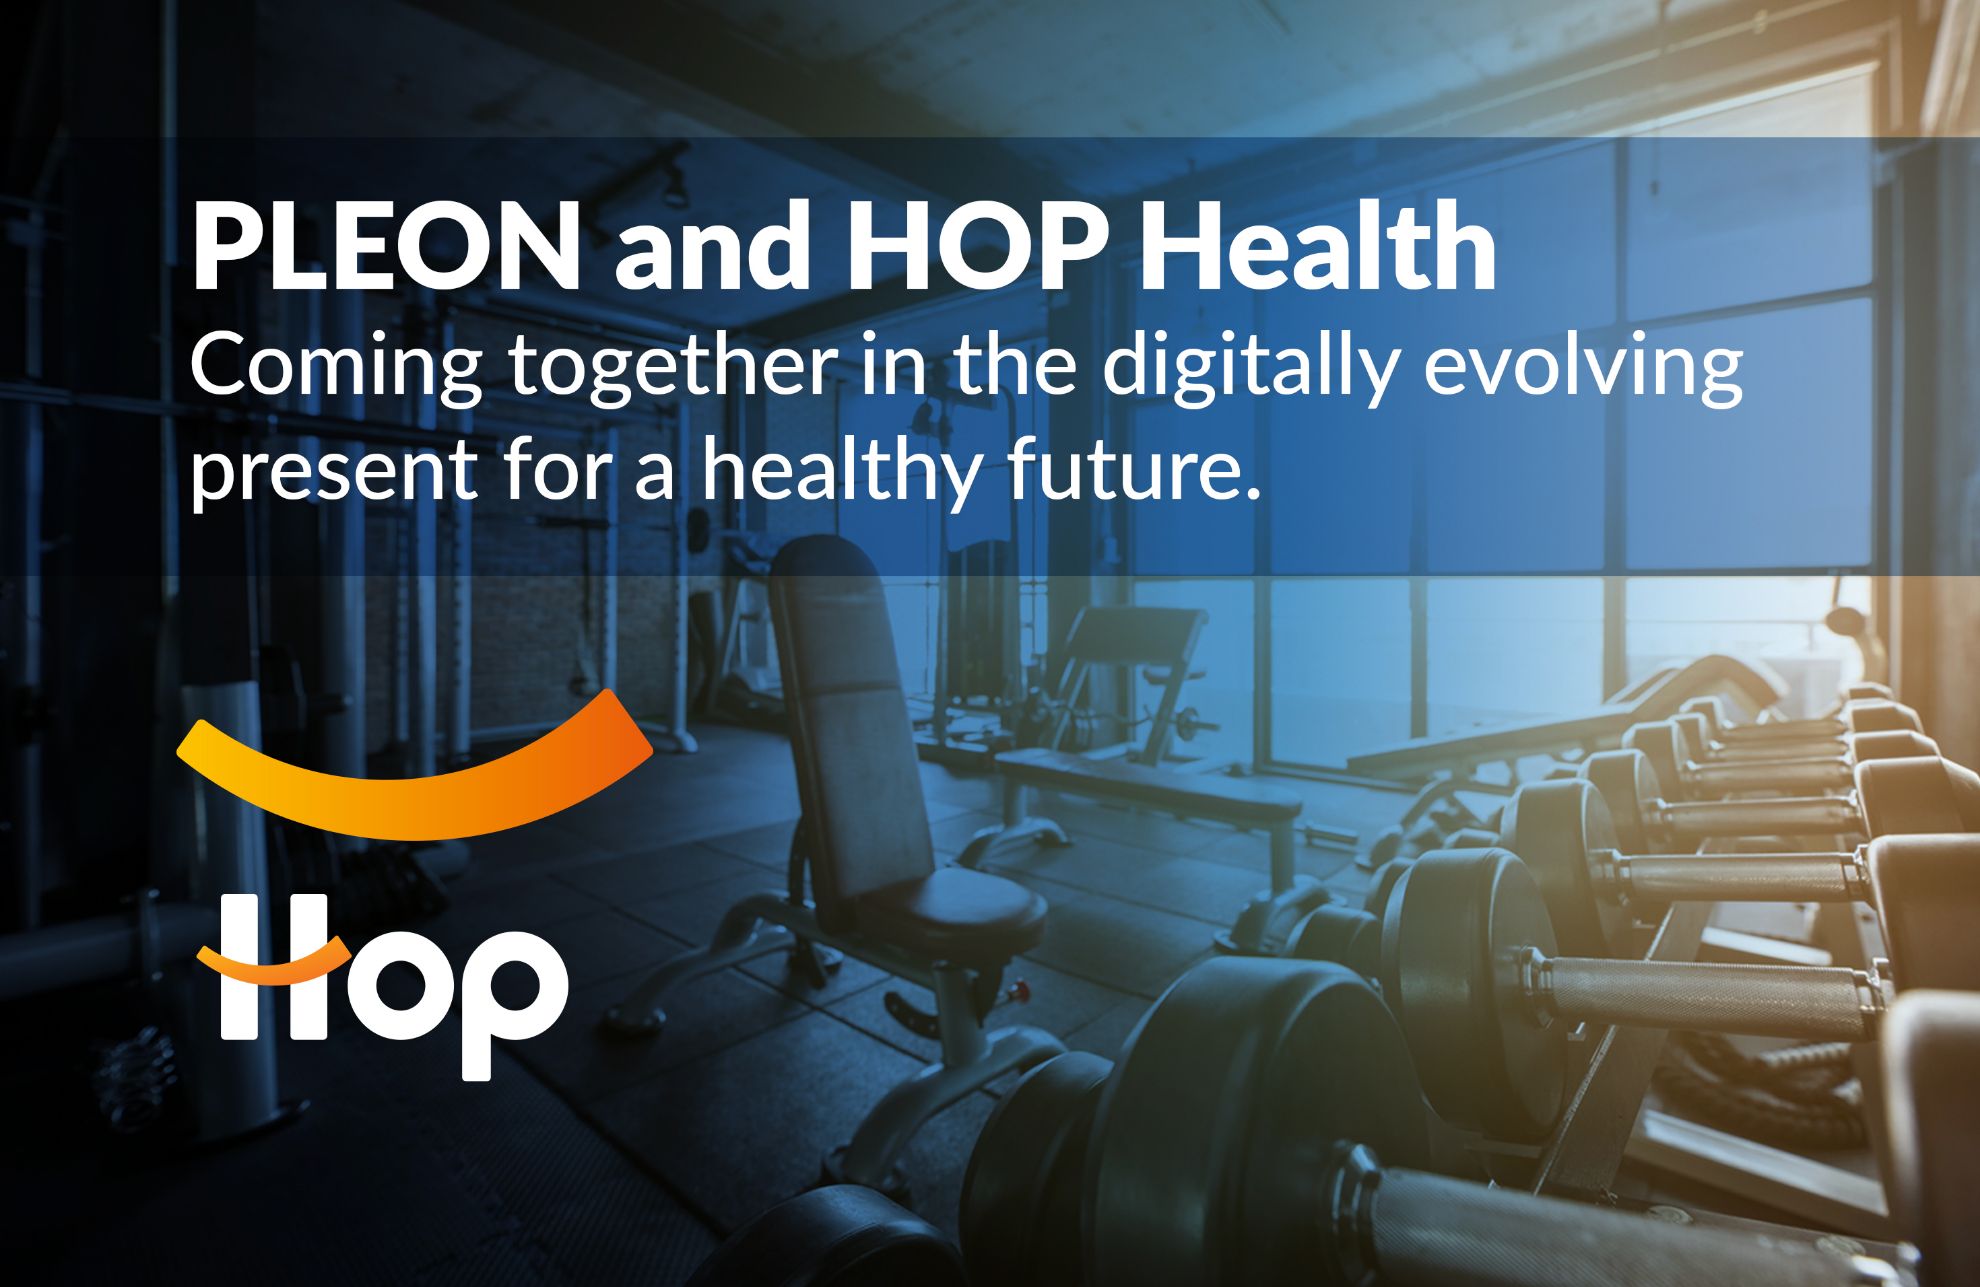 Special Offers Begin as HOP Partners: Benefits from PLEON for HOP Health Members